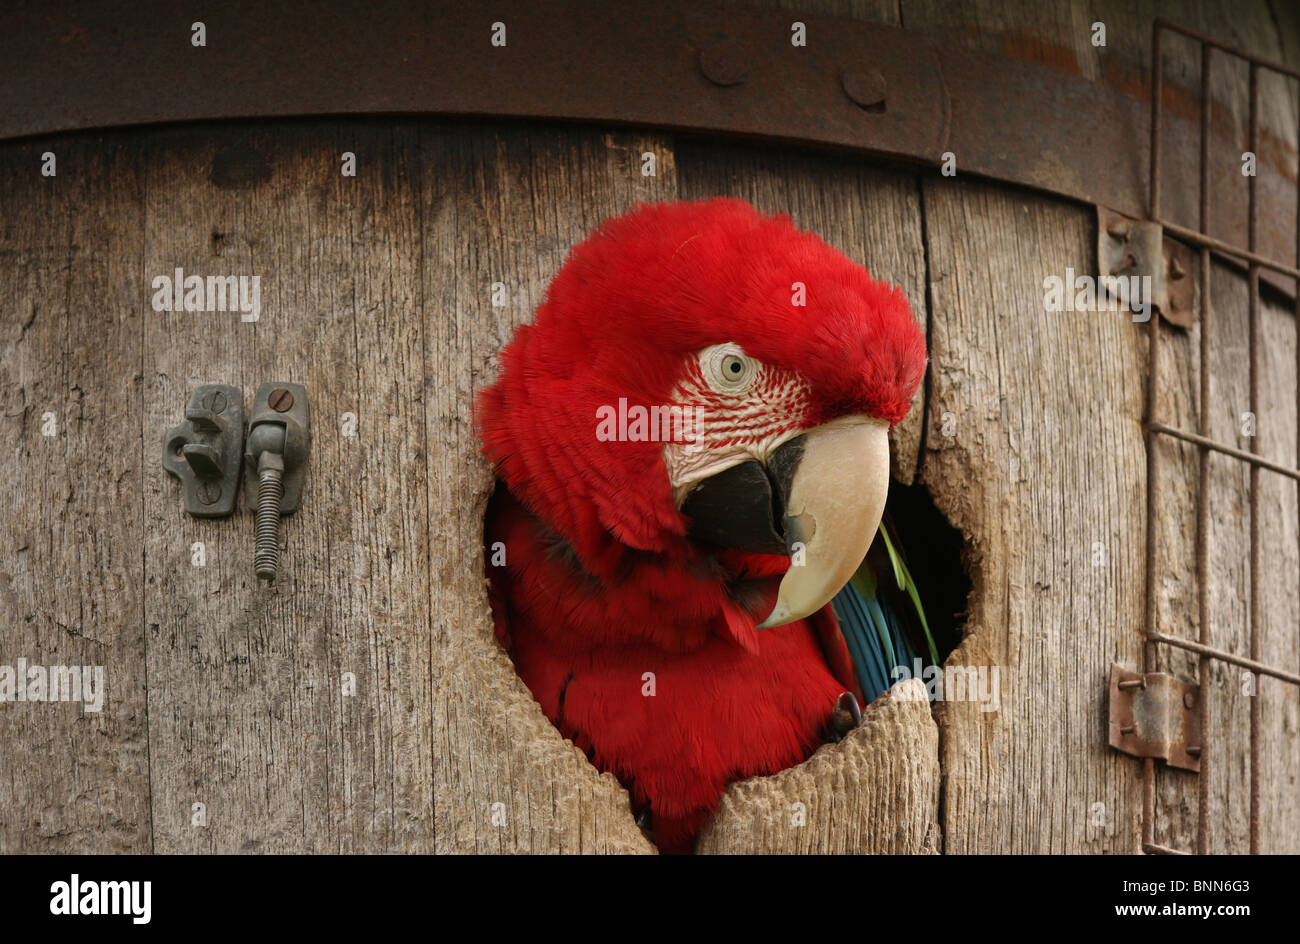 The red head of a Green Wing Macaw parrot sticking out of a barrel Stock Photo